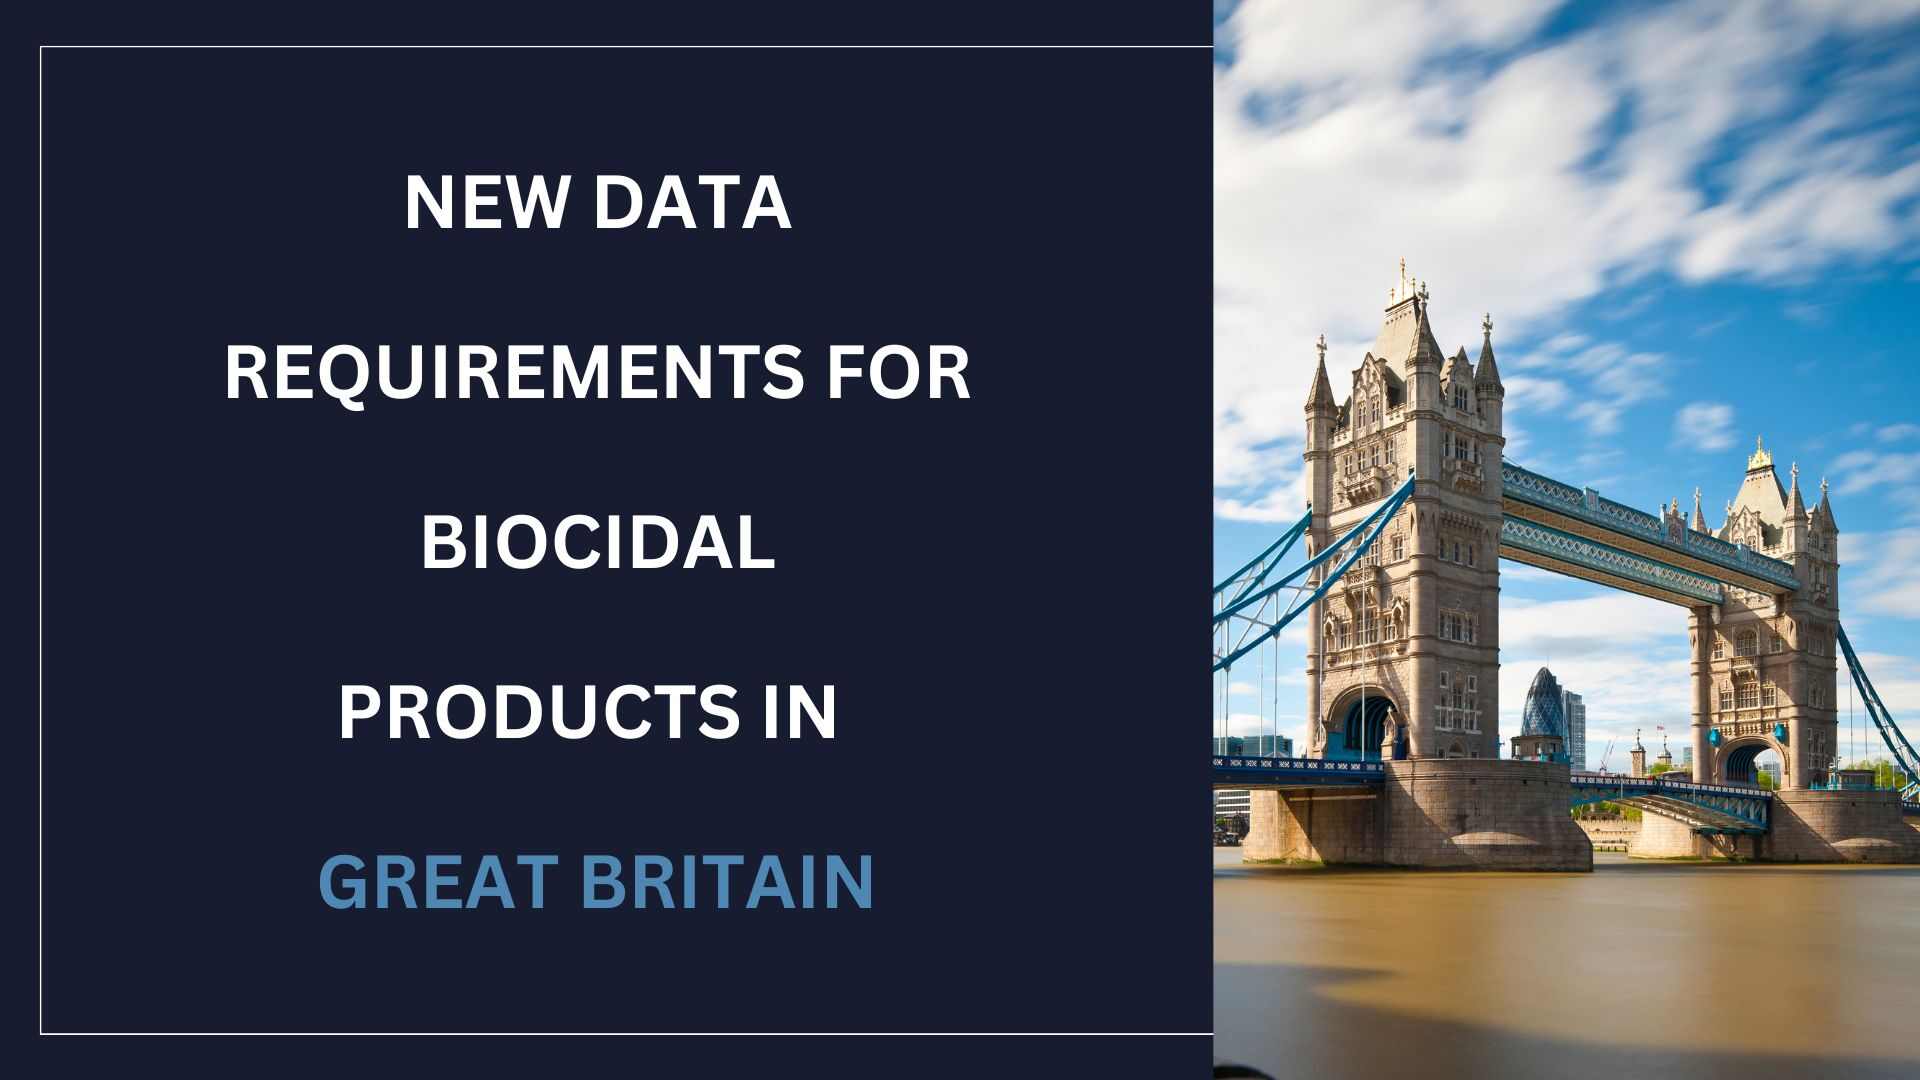 New data requirements for Biocidal products in Great Britain